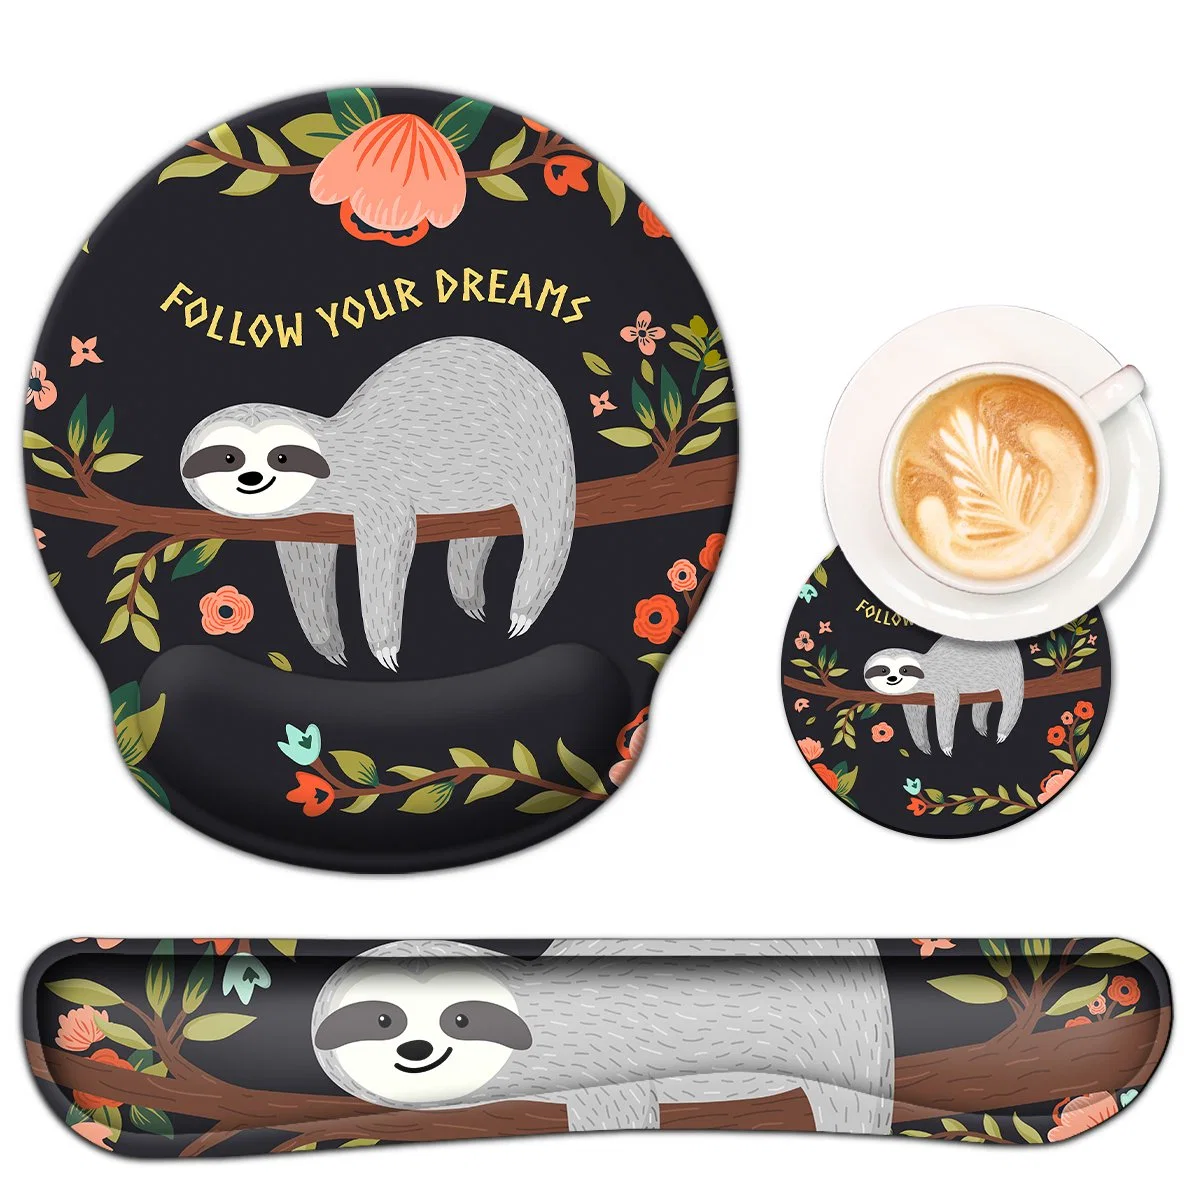 Ergonomic Mouse Pad Keyboard Wrist Rest Pad, Mousepad and Cup Pad, Cute Sloth